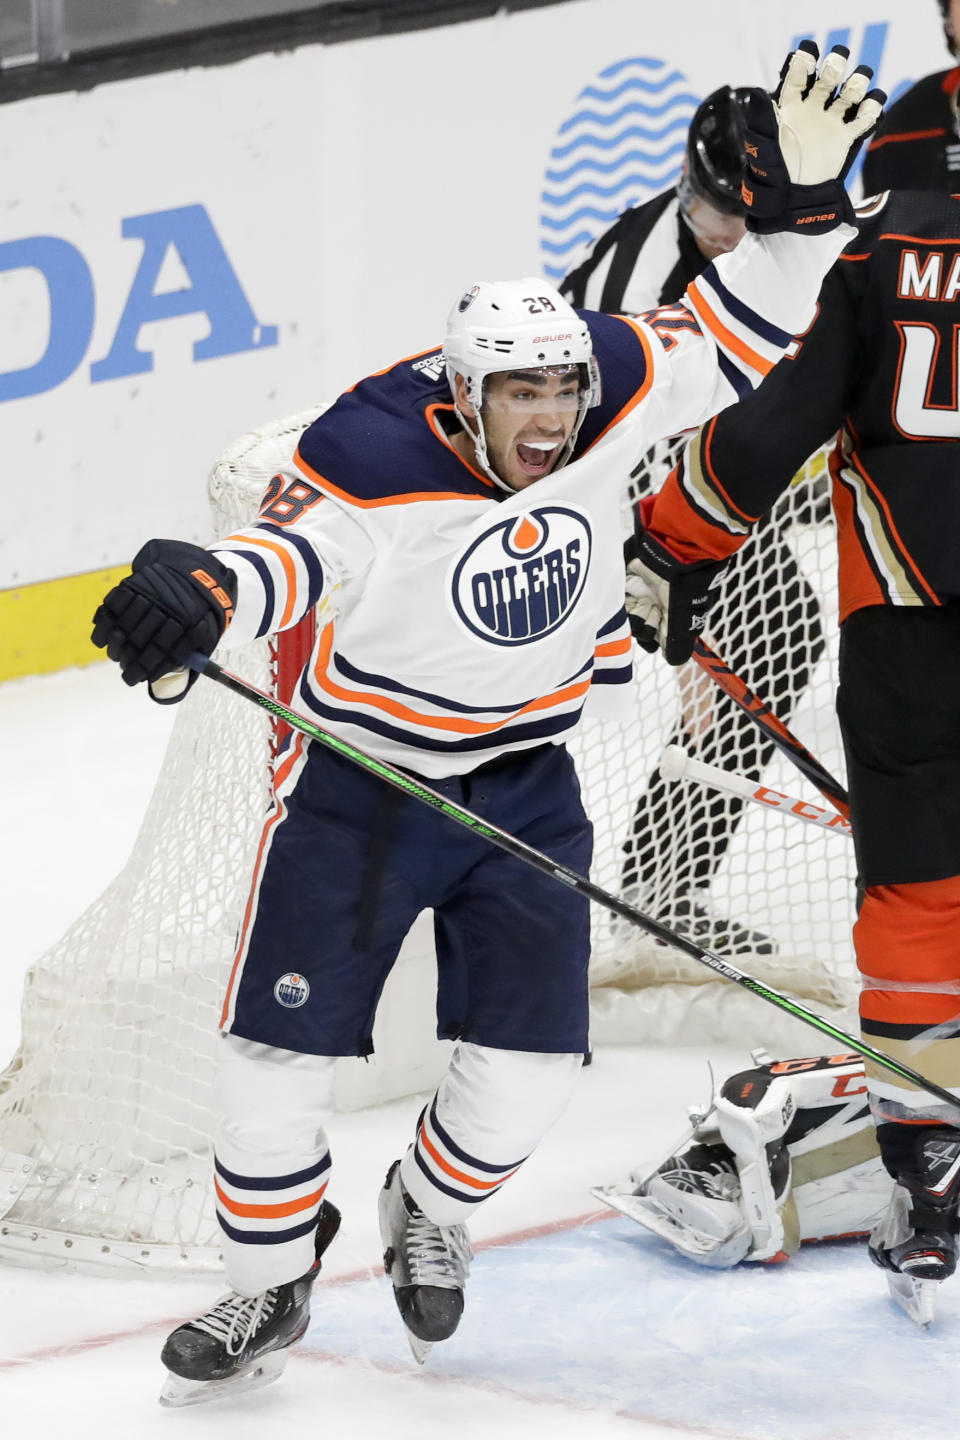 Edmonton Oilers left wing Andreas Athanasiou celebrates after scoring during the third period of an NHL hockey game against the Anaheim Ducks in Anaheim, Calif., Tuesday, Feb. 25, 2020. The Ducks won 4-3. (AP Photo/Chris Carlson)